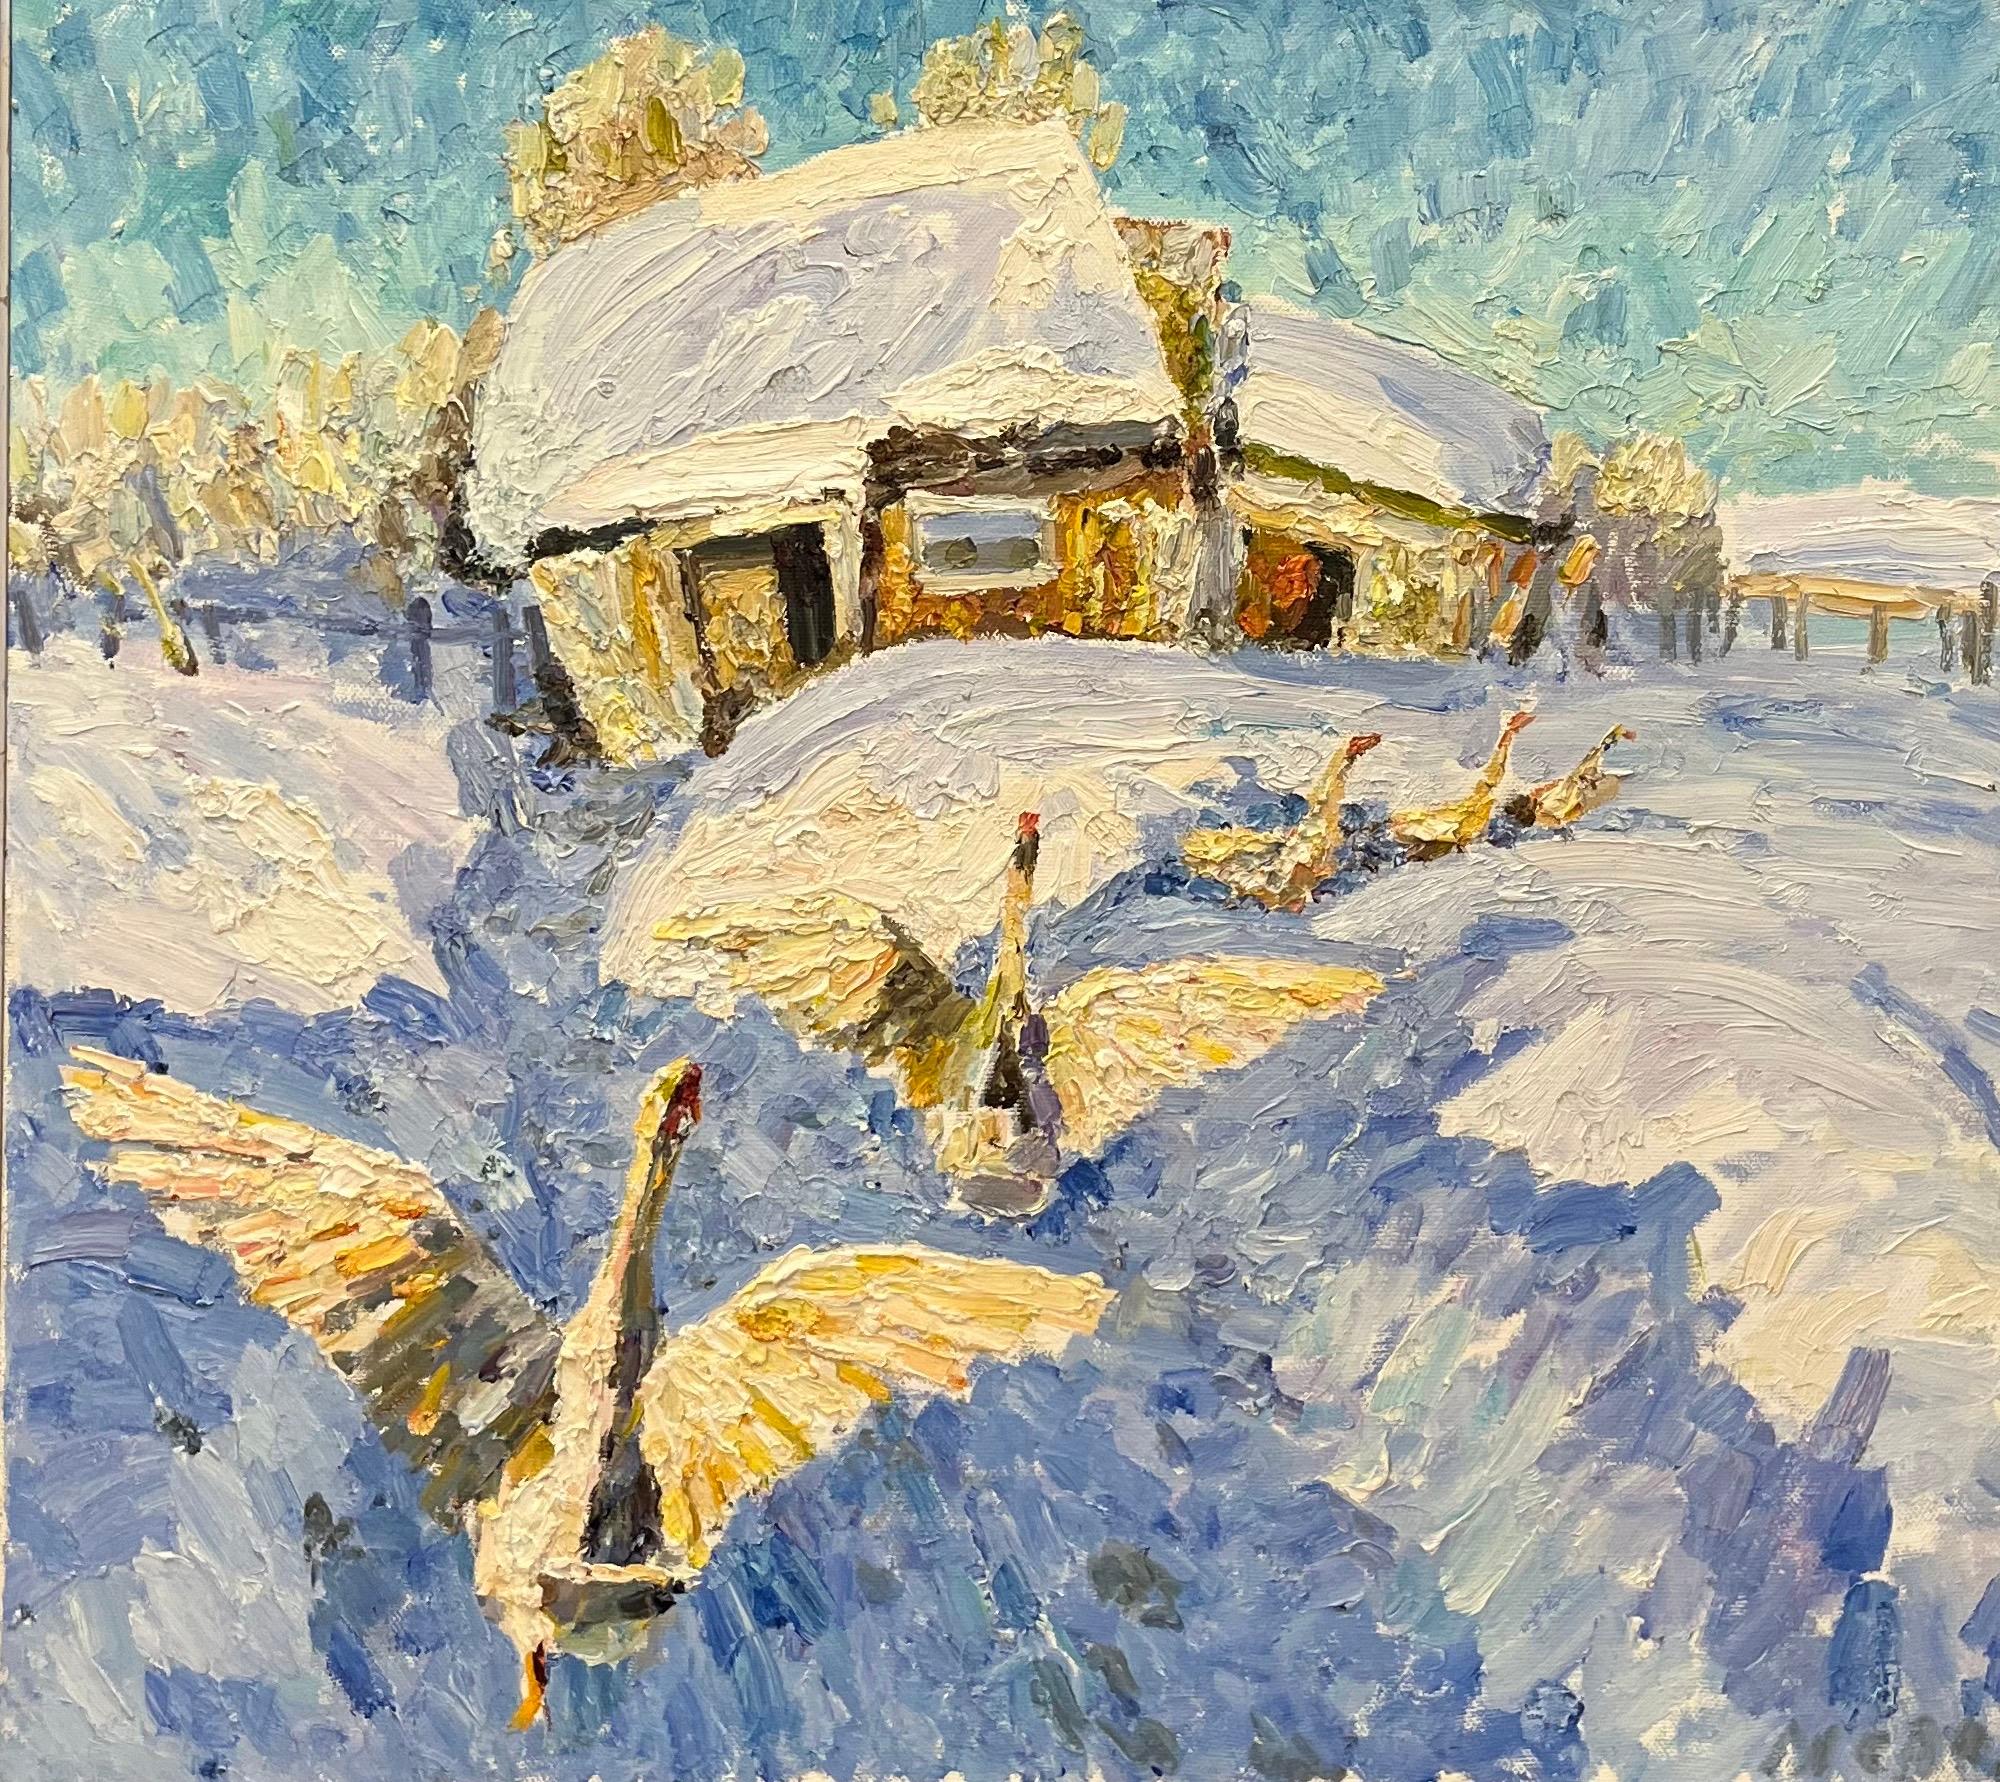 Georgij Moroz Landscape Painting - "Geese in the snow" oil cm. 100 x 80 